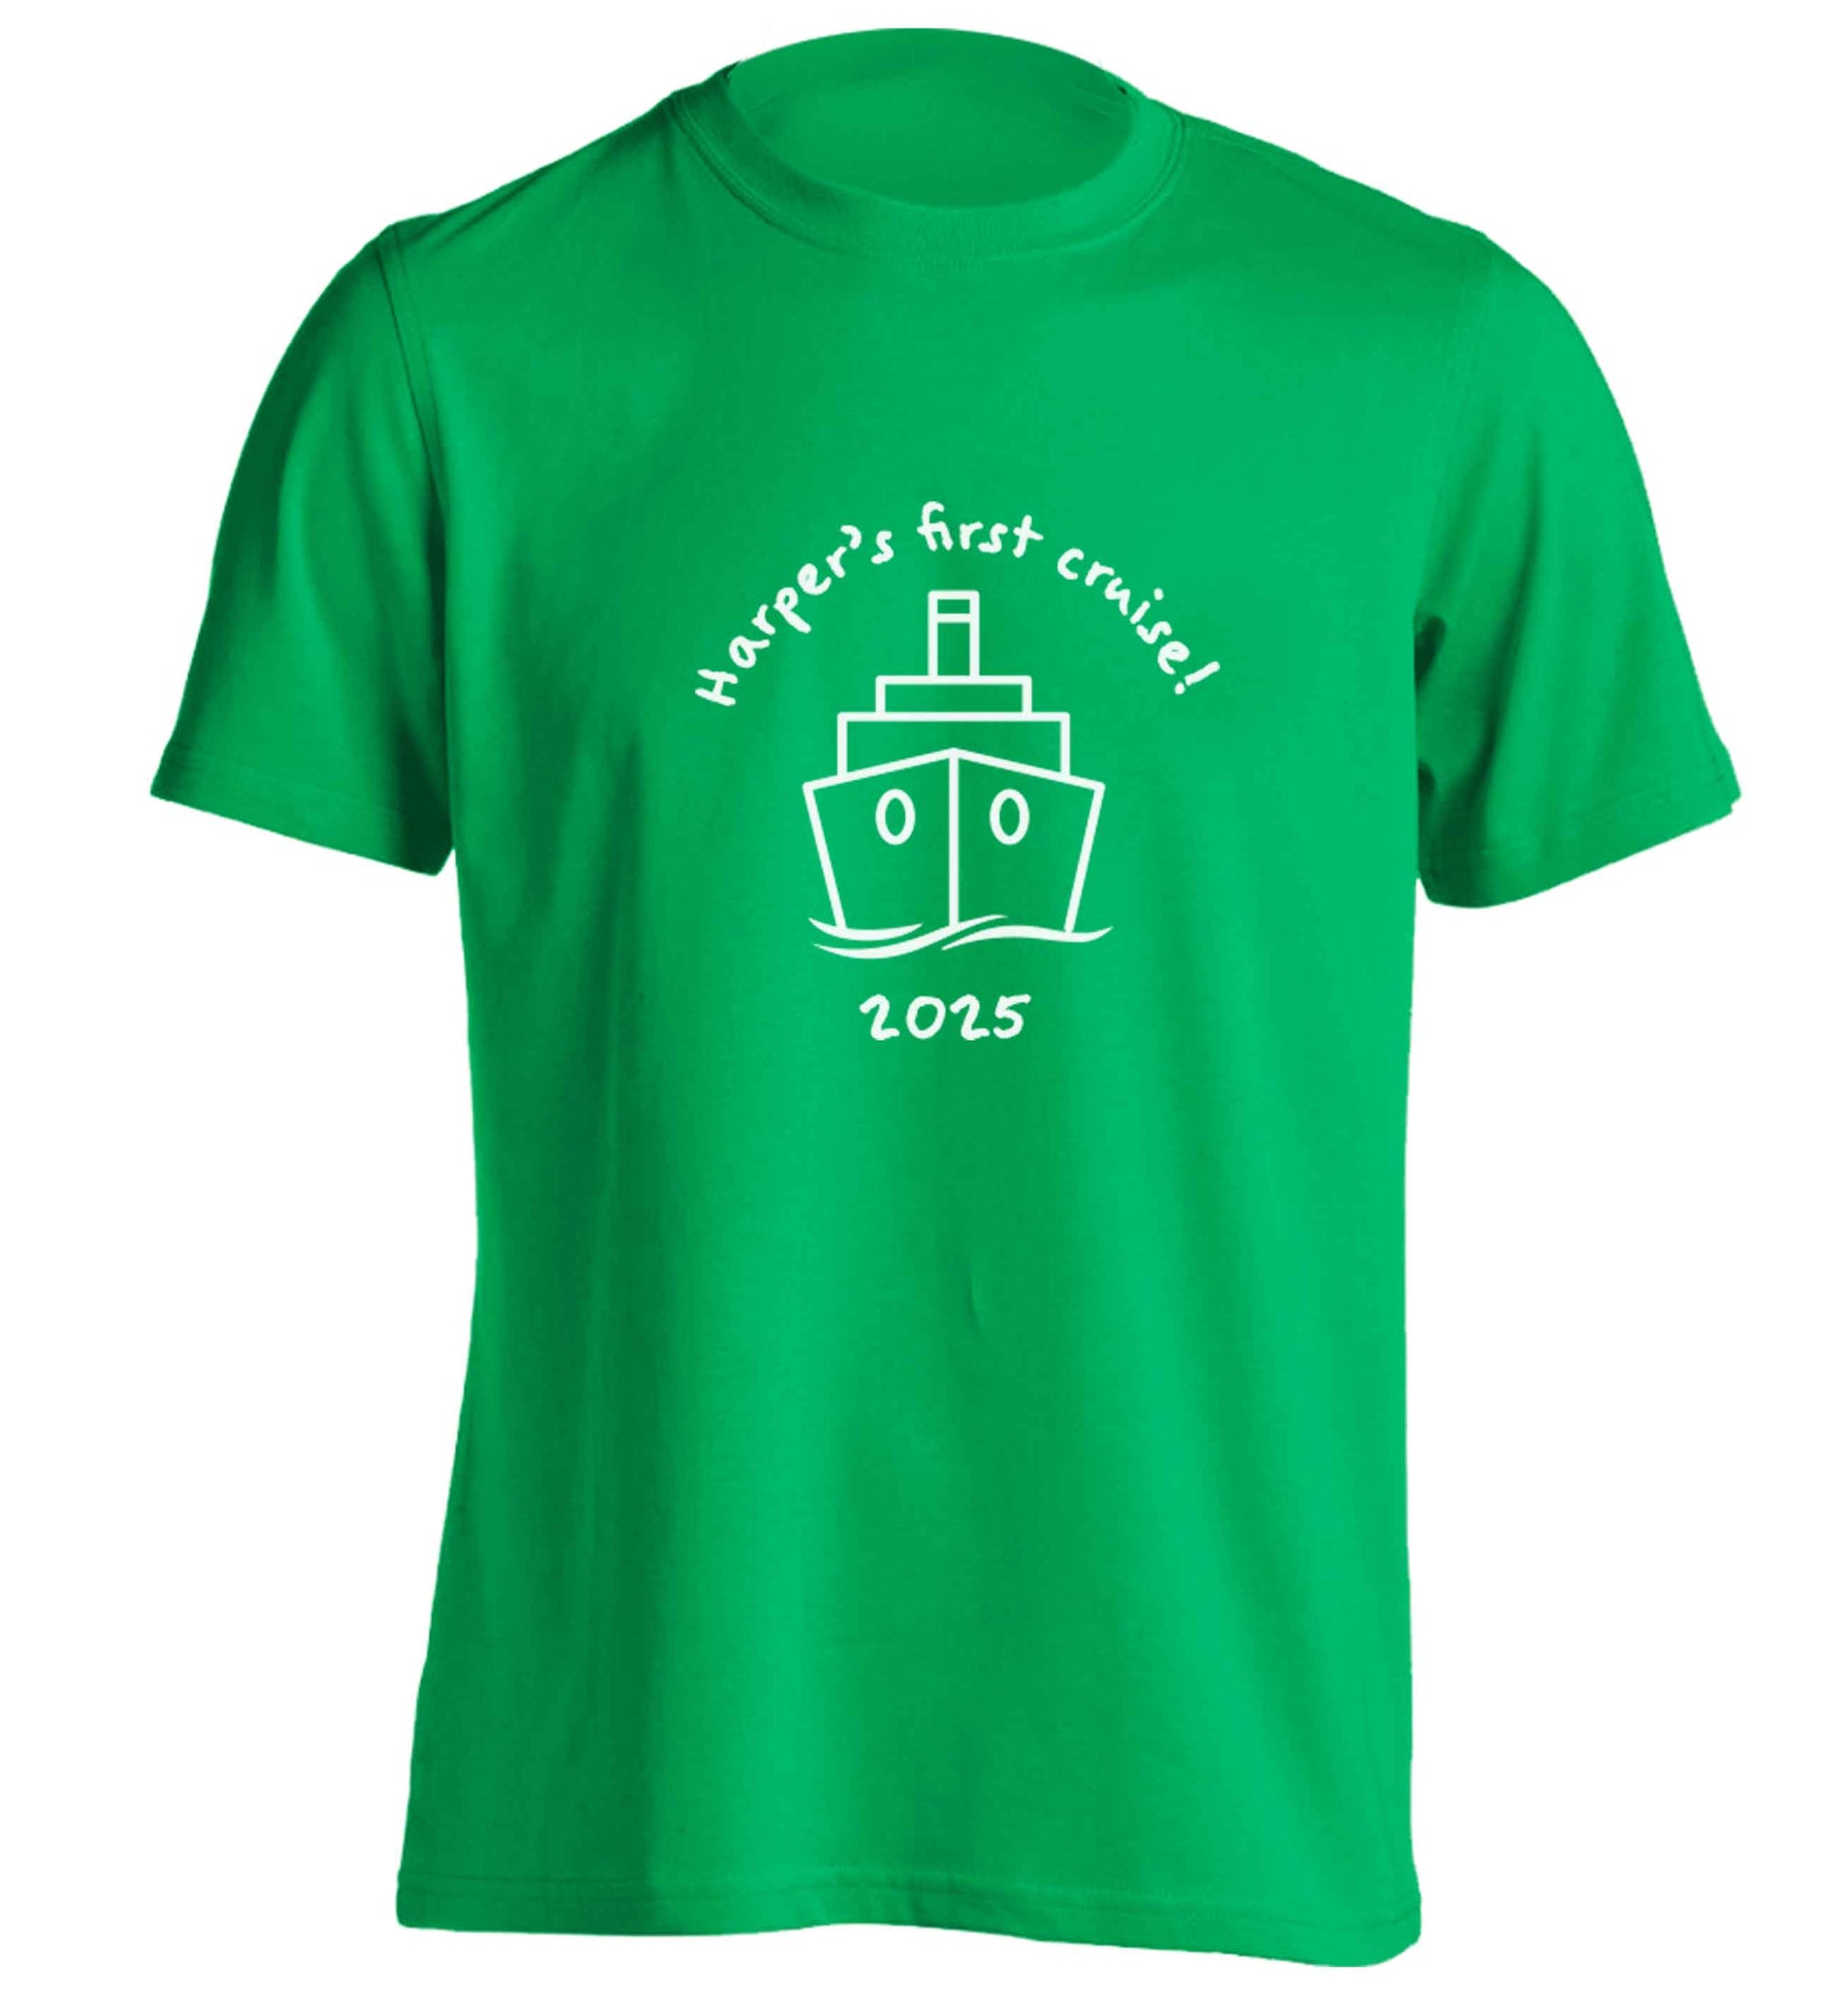 Personalised first cruise adults unisex green Tshirt 2XL